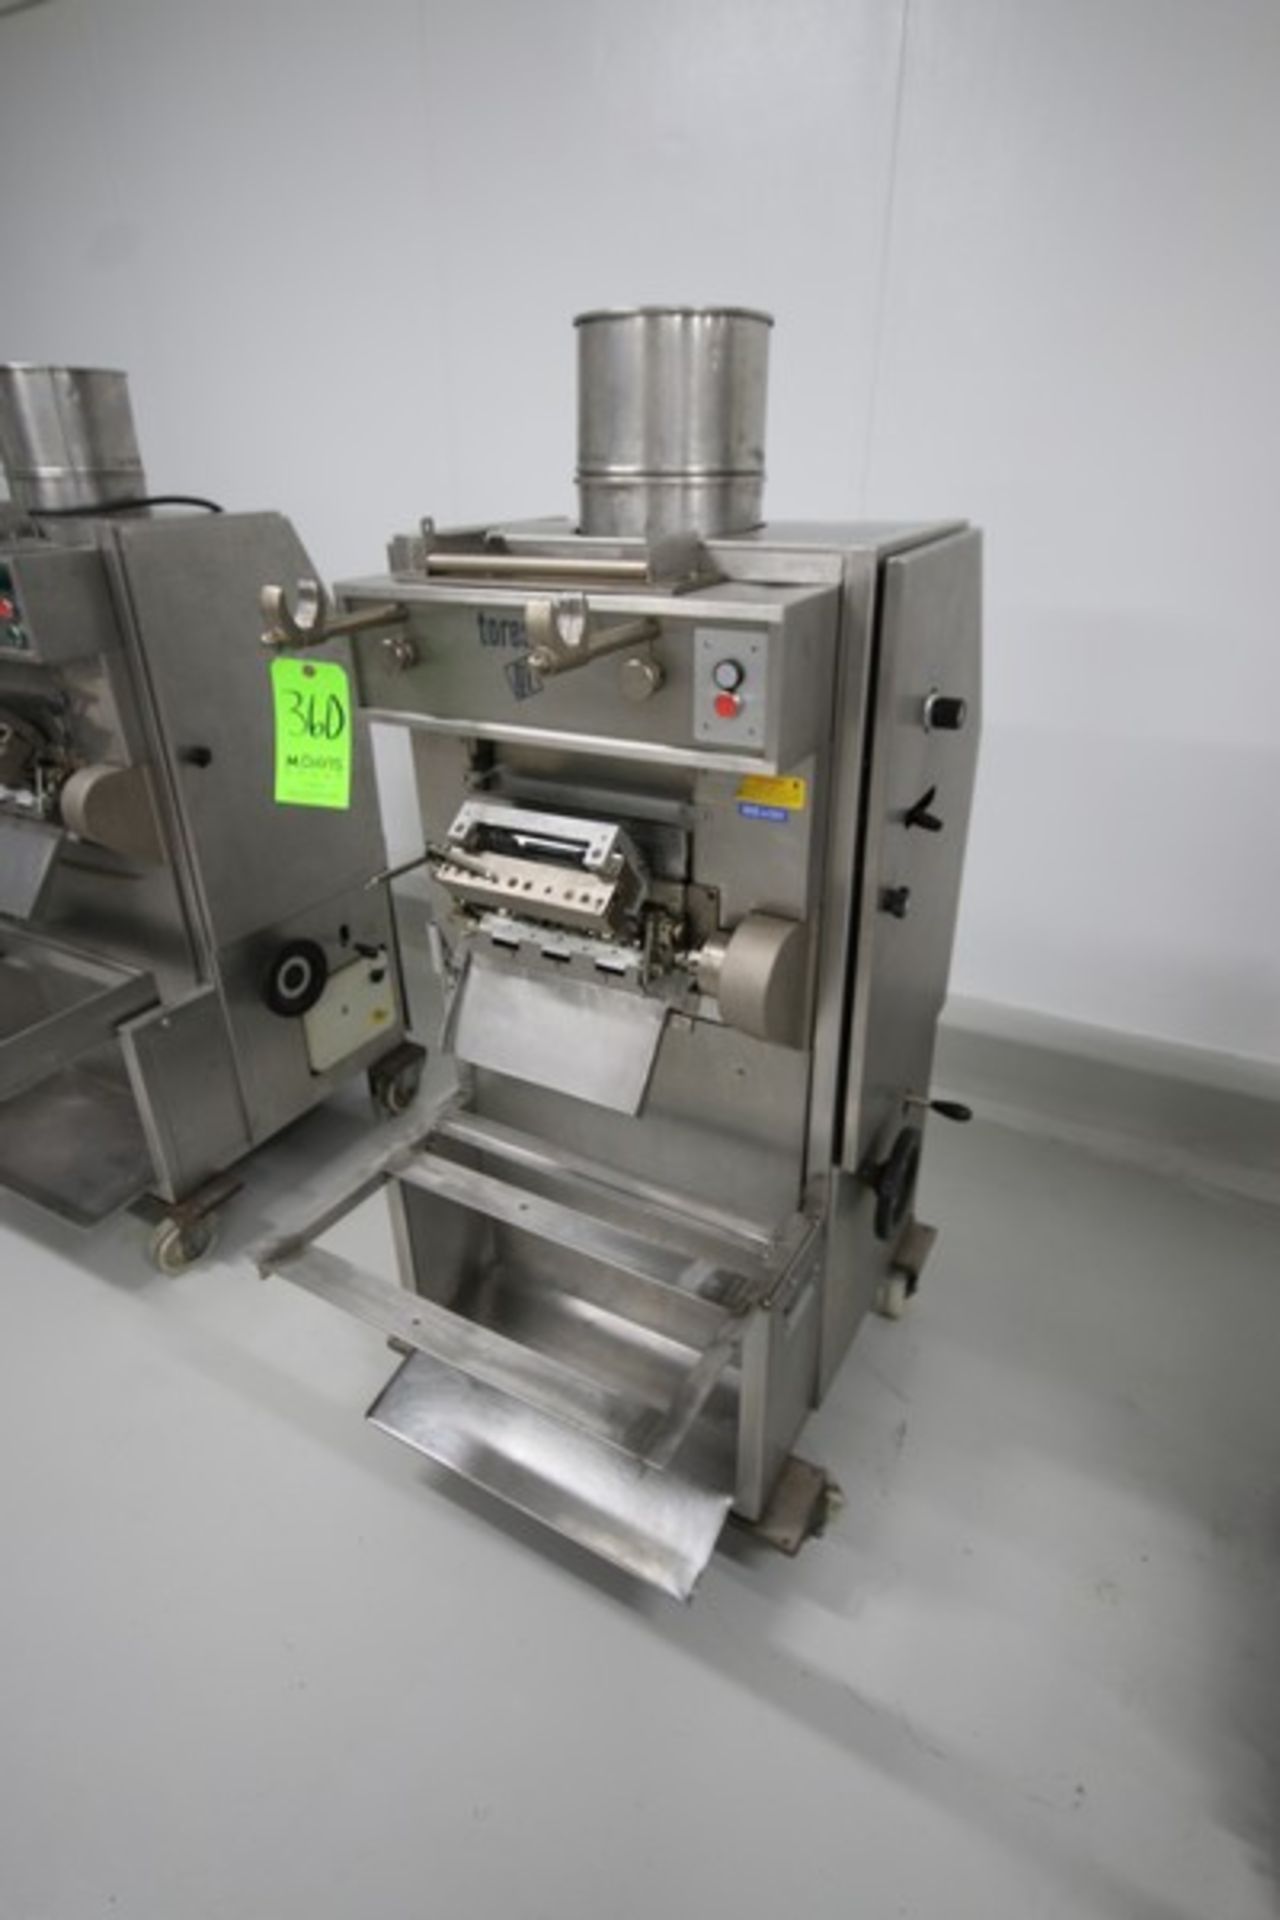 Toresani Tortellini Machine, M/N MR265A, Type 85451, 220 Volts, Mounted on Portable Frame (LOCATED I - Image 2 of 6